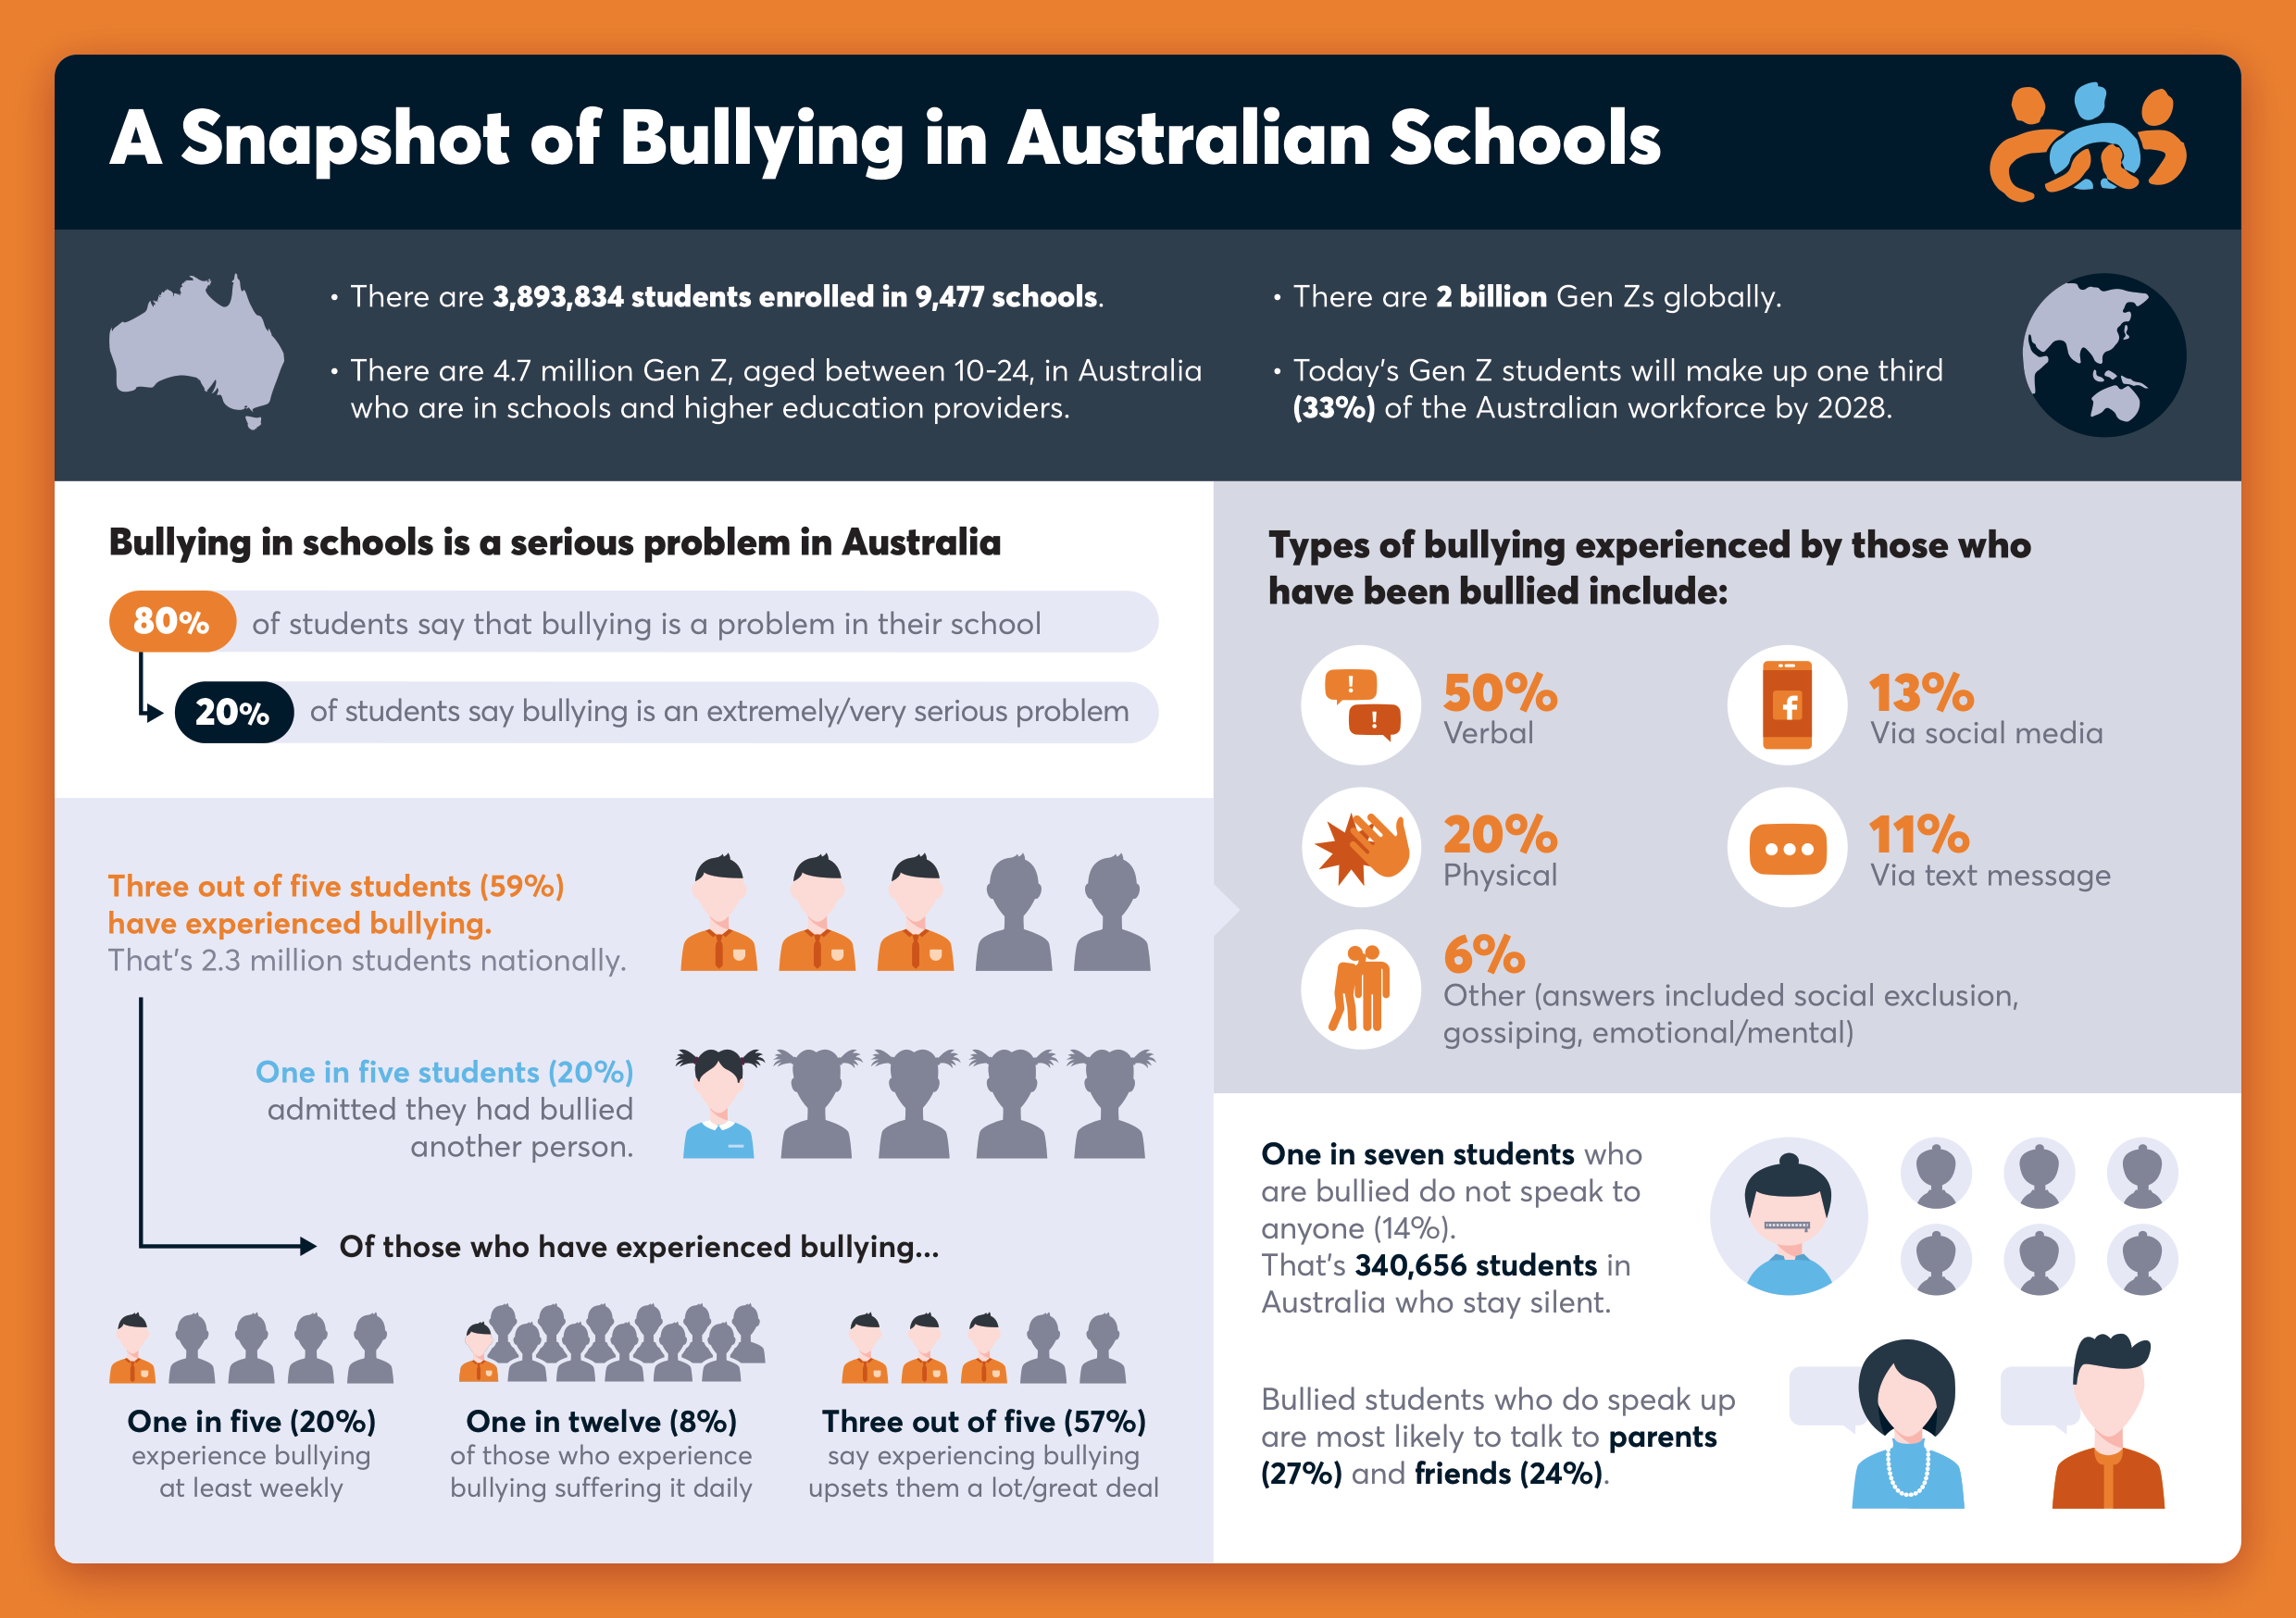 An infographic of bullying in Australian schools created by McCrindle Research.